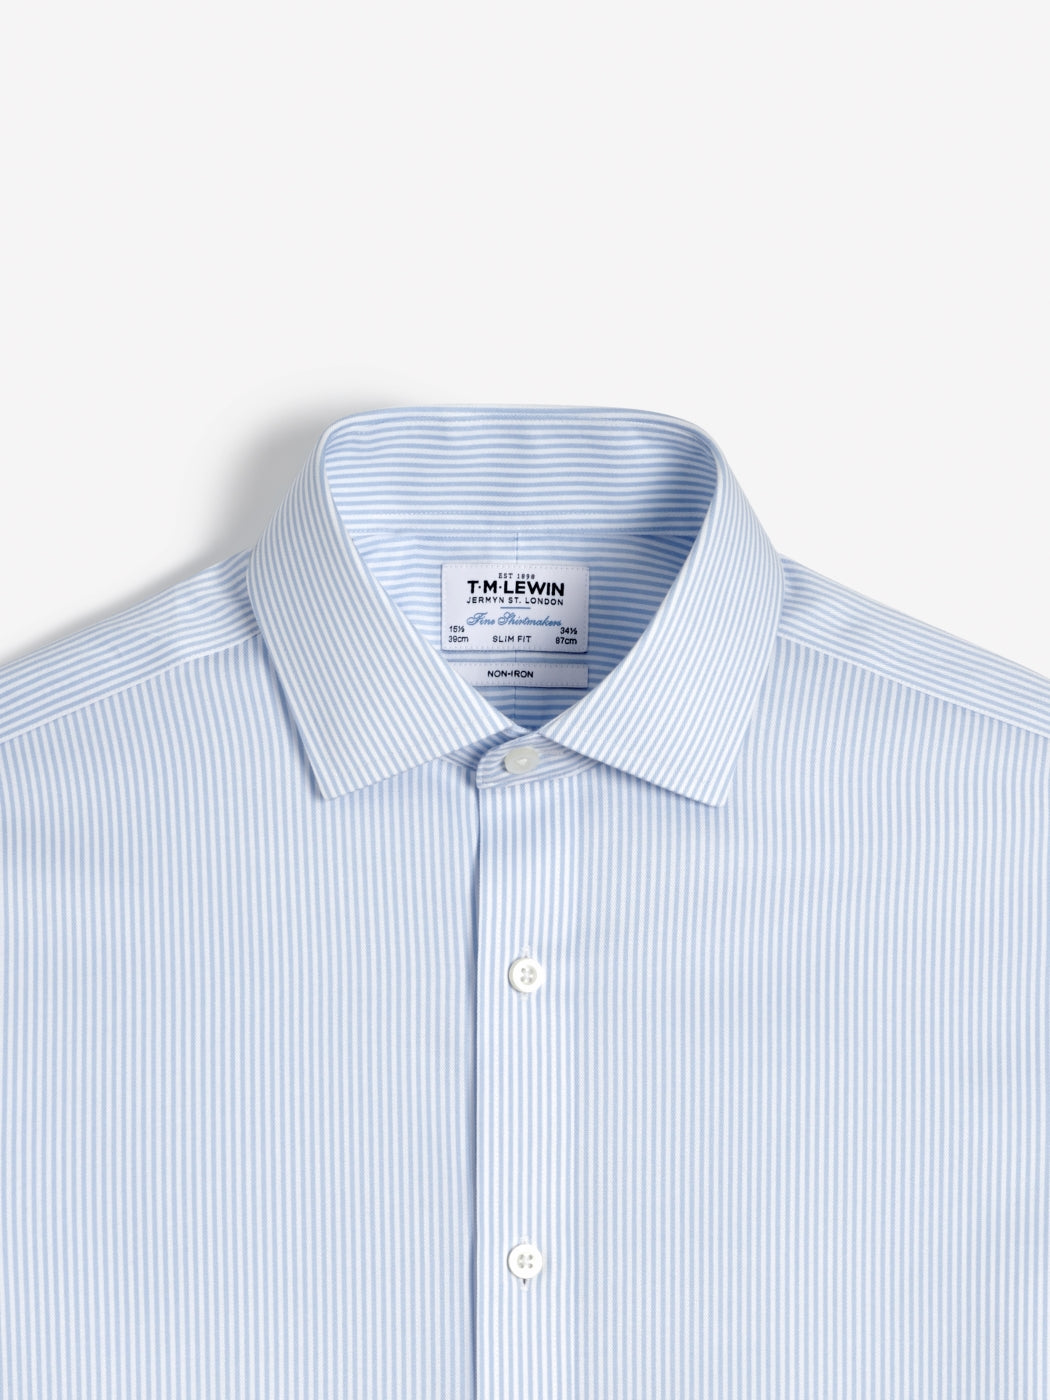 Image 1 of Non-Iron Light Blue Bengal Stripe Twill Fitted Double Cuff Classic Collar Shirt